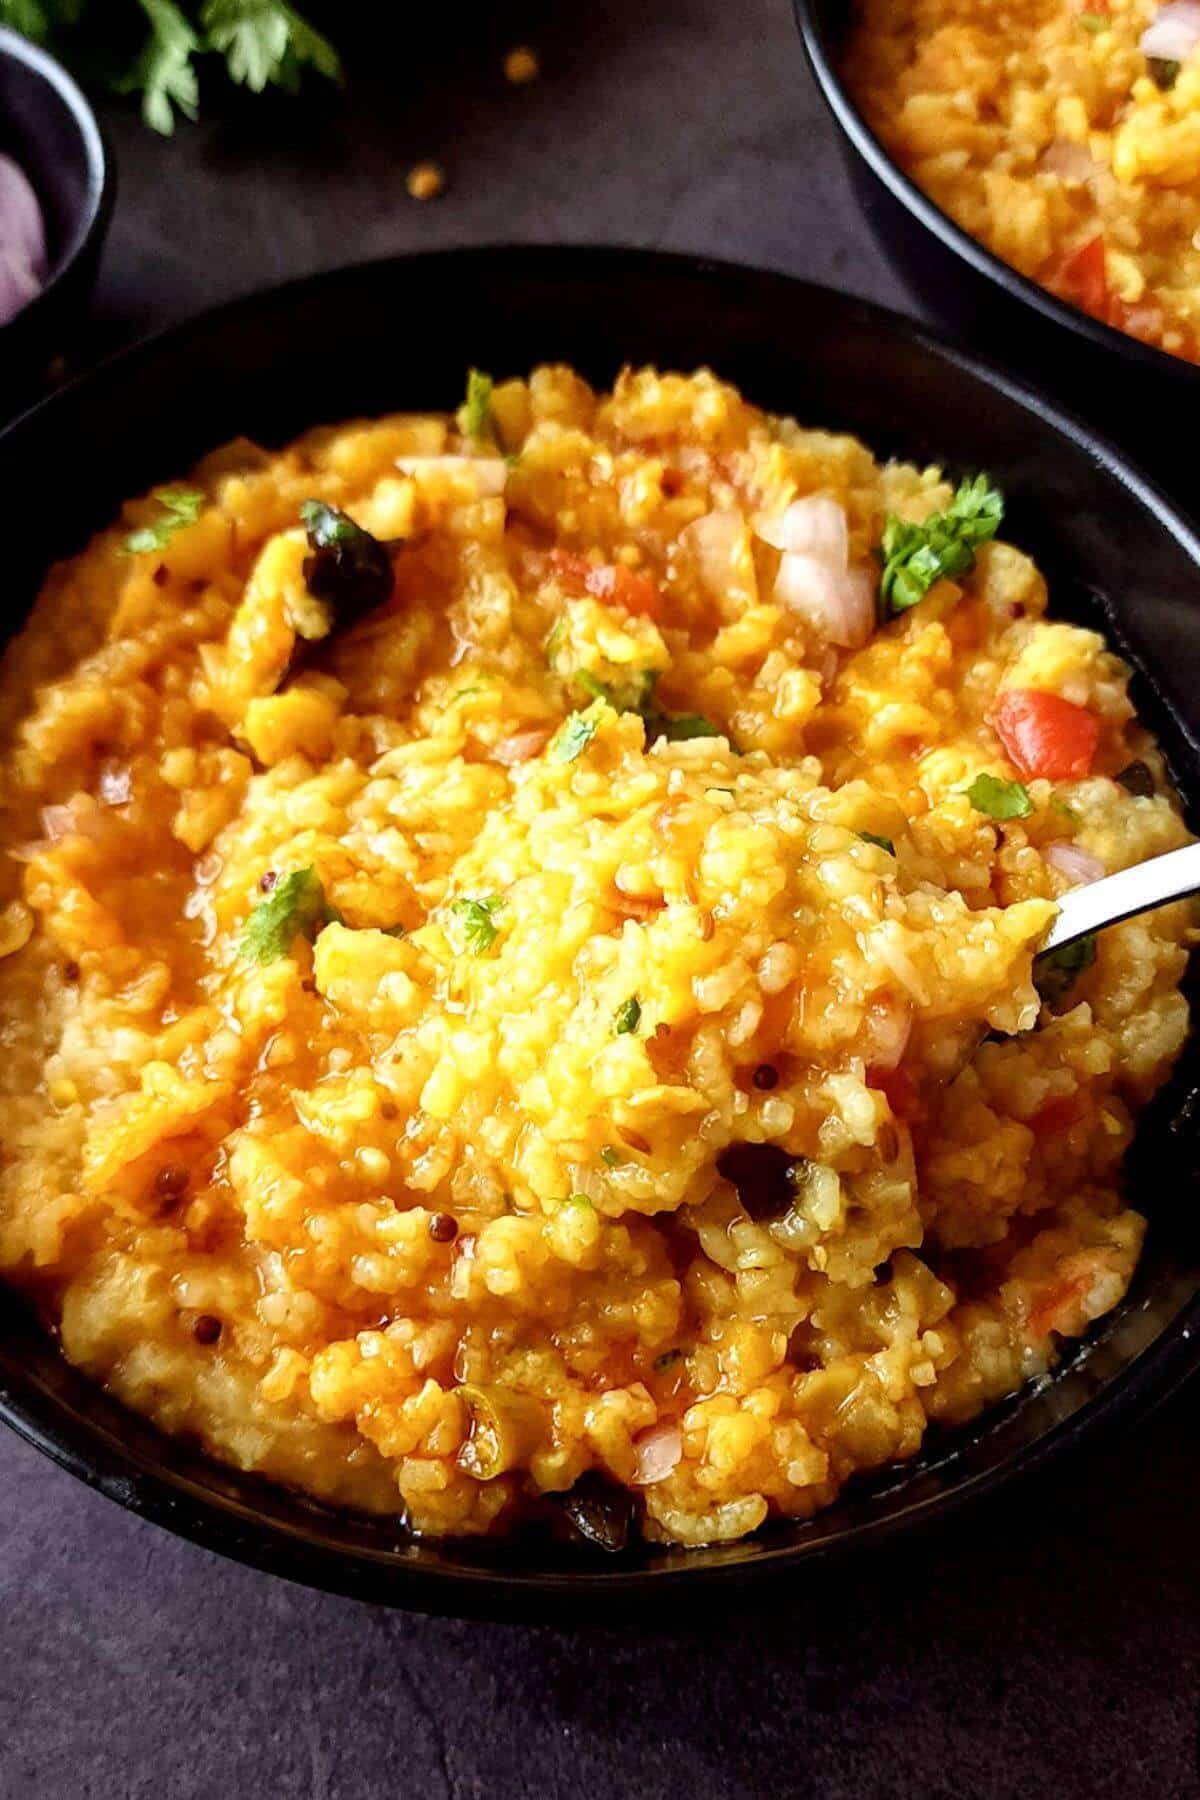 Tuvar dal khichdi in a bowl with a spoon.